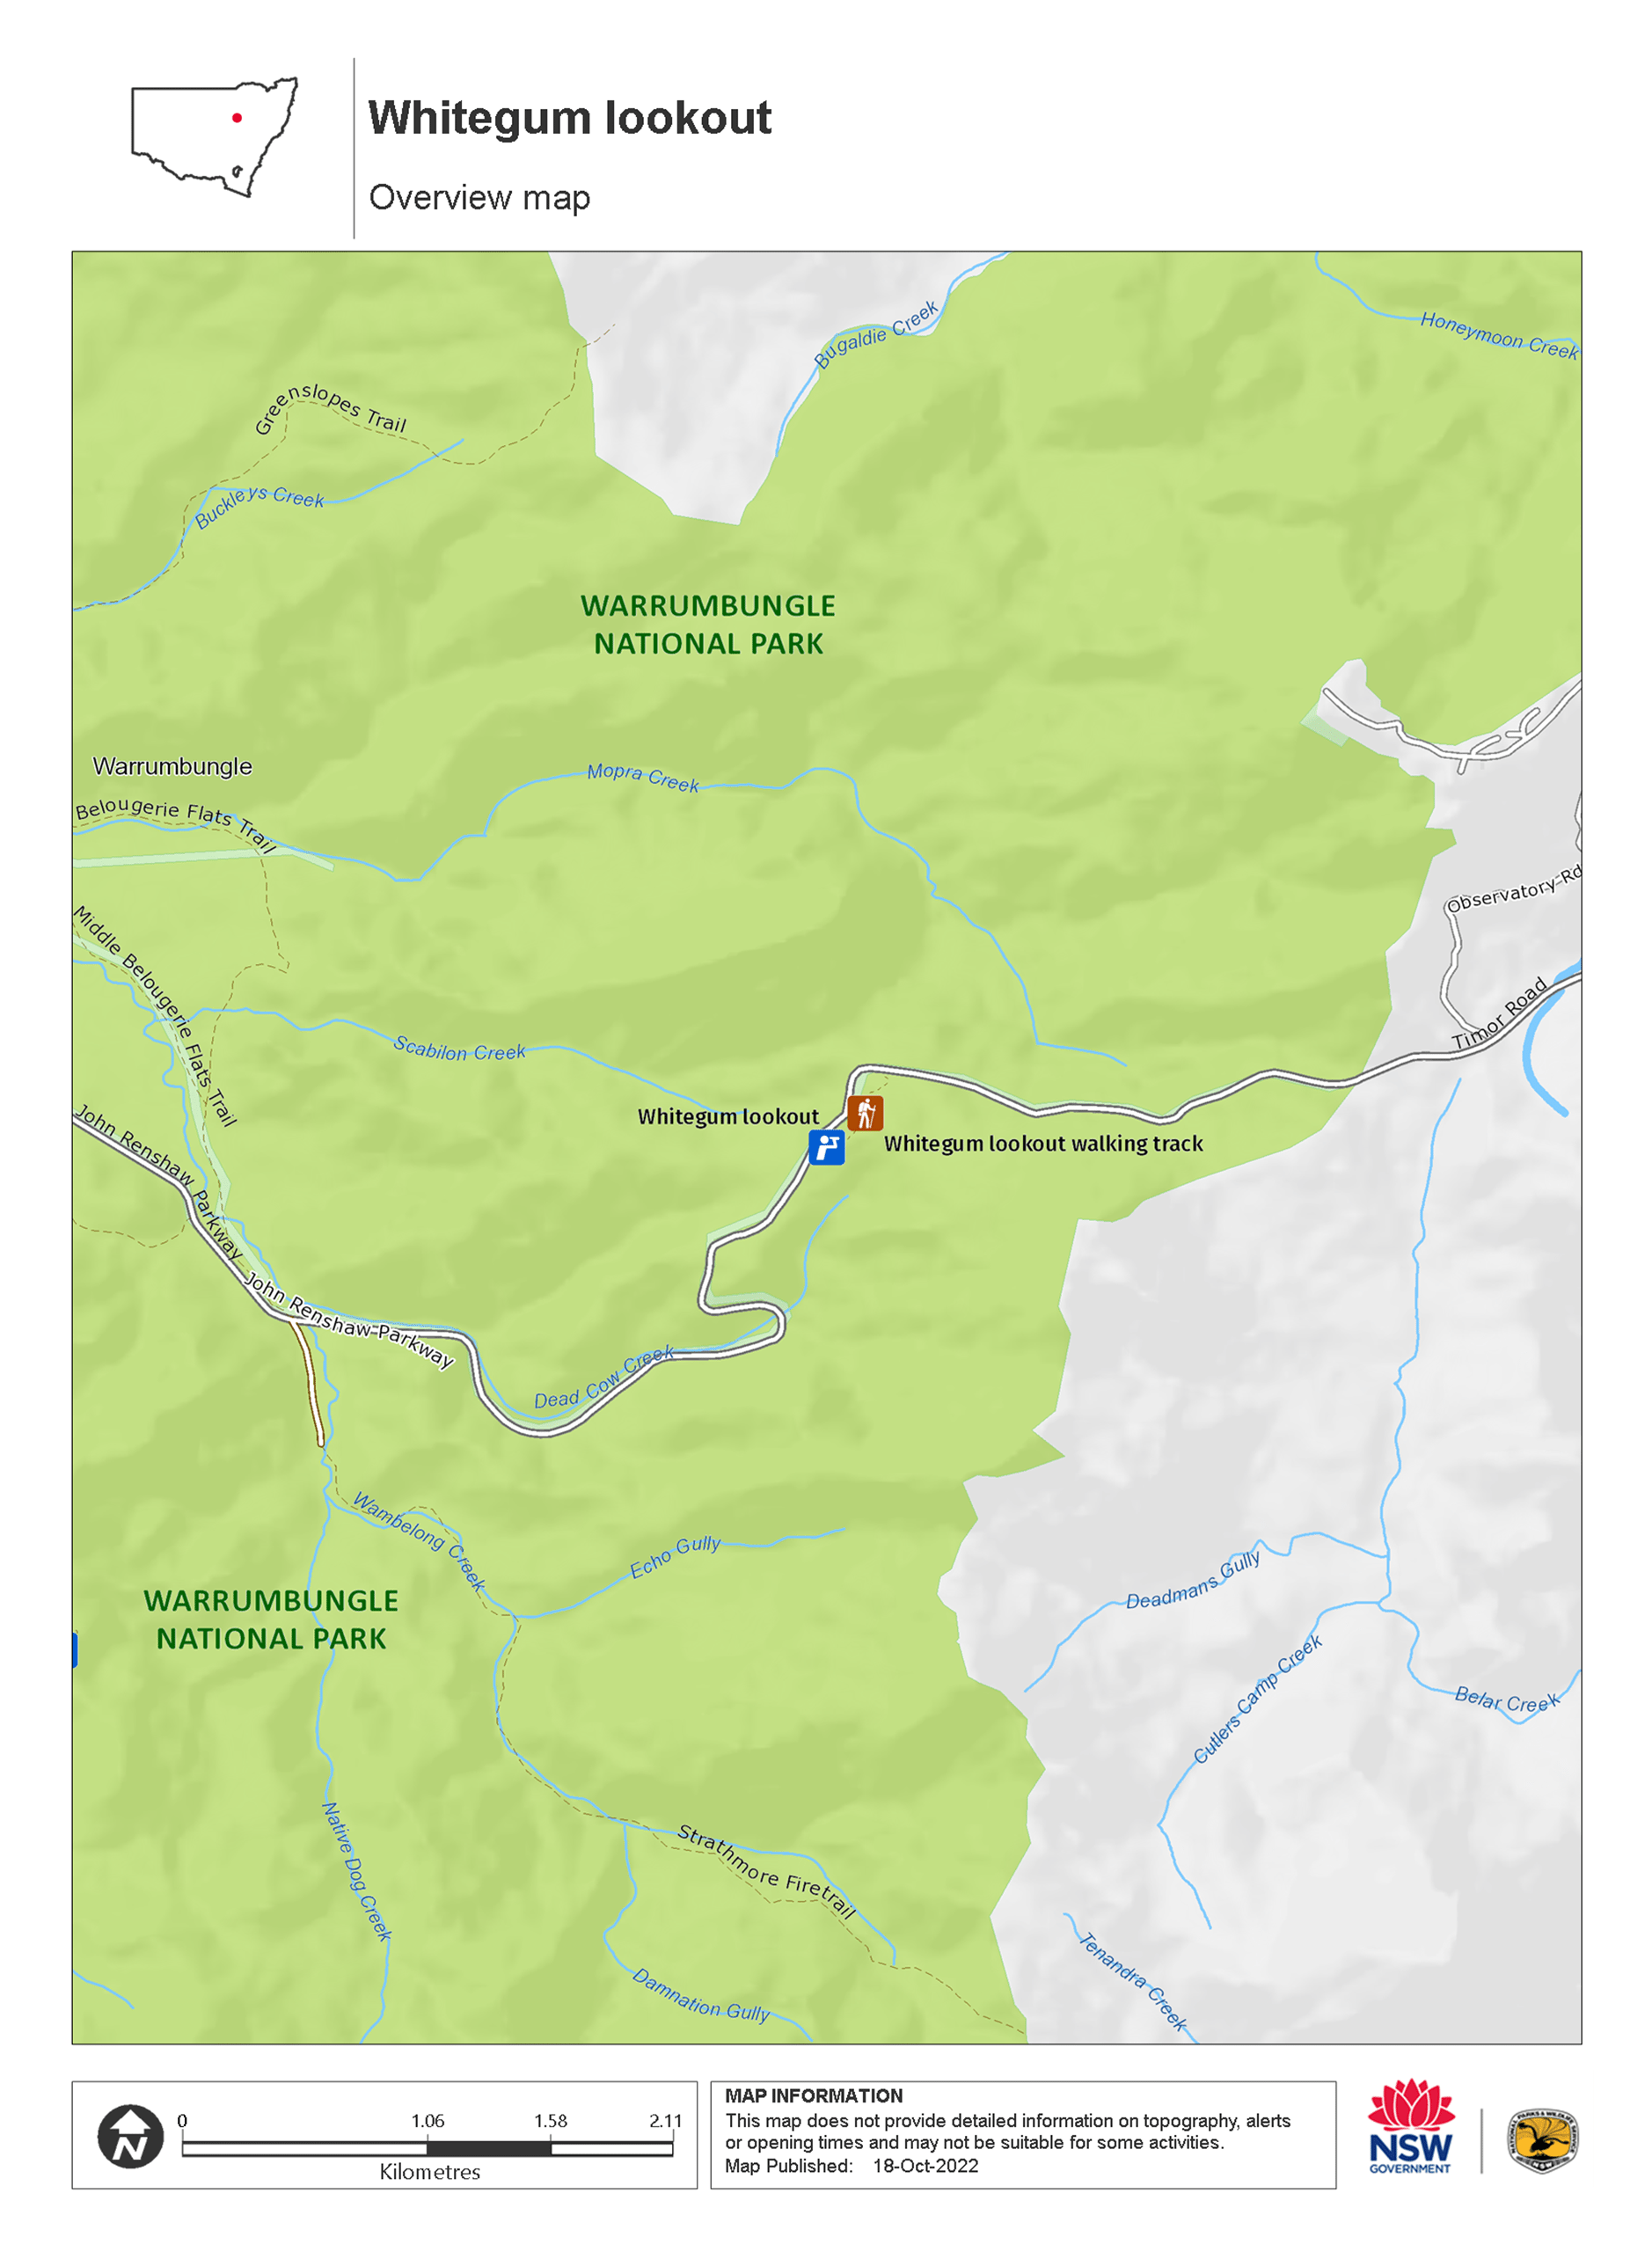 Whitegum lookout - overview map